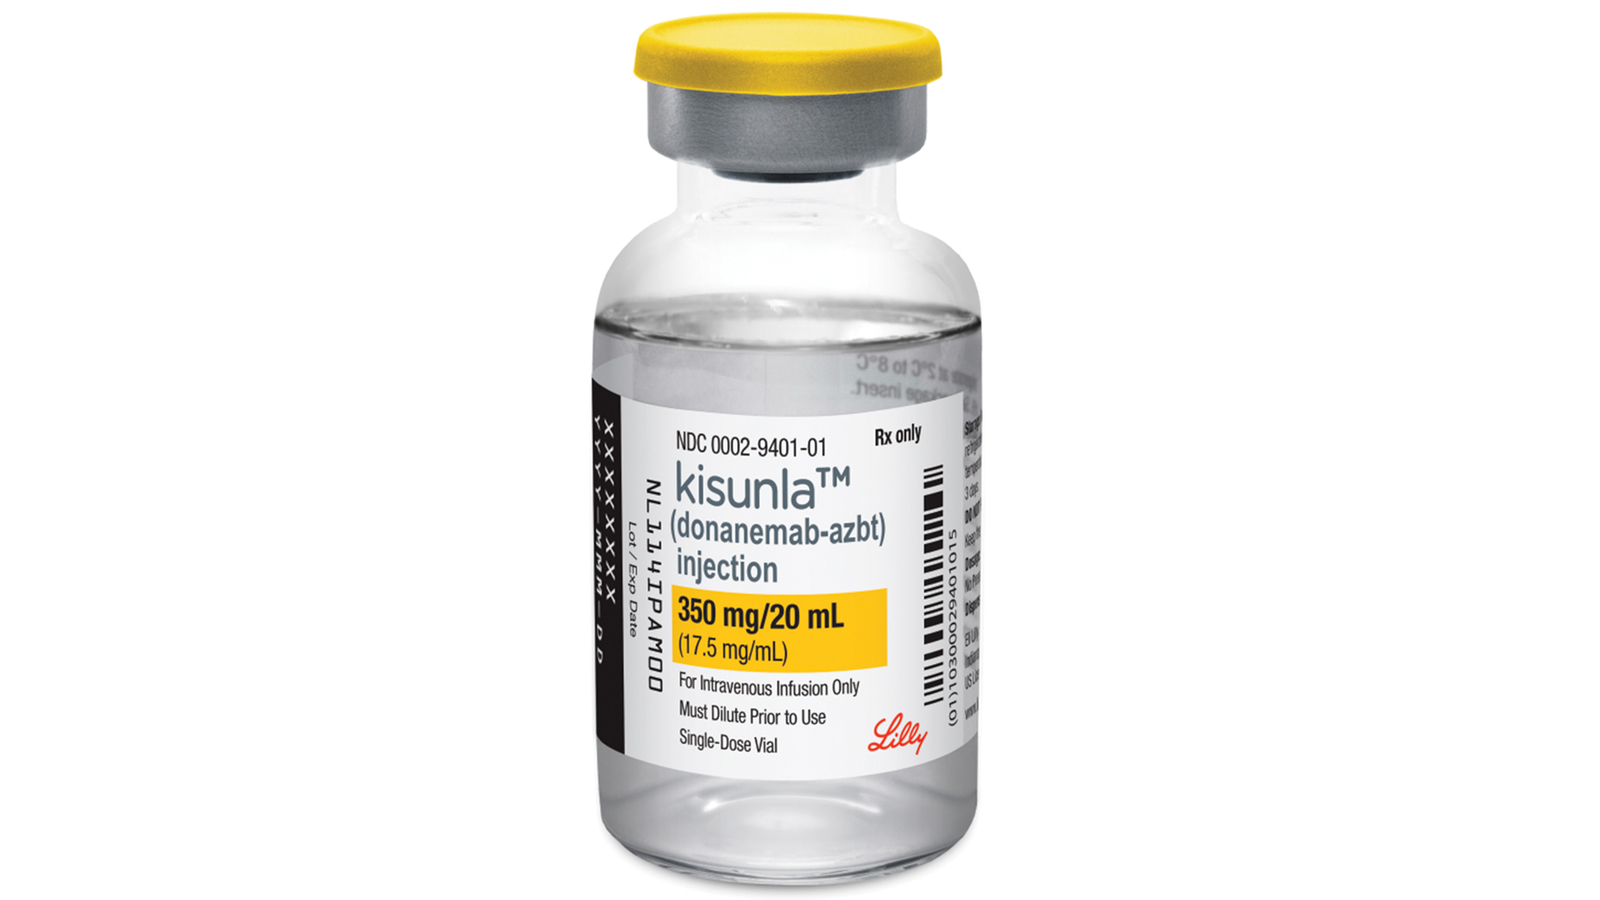 Alzheimer’s disease: FDA approves Kisunla as second drug that can modestly slow disease [Video]